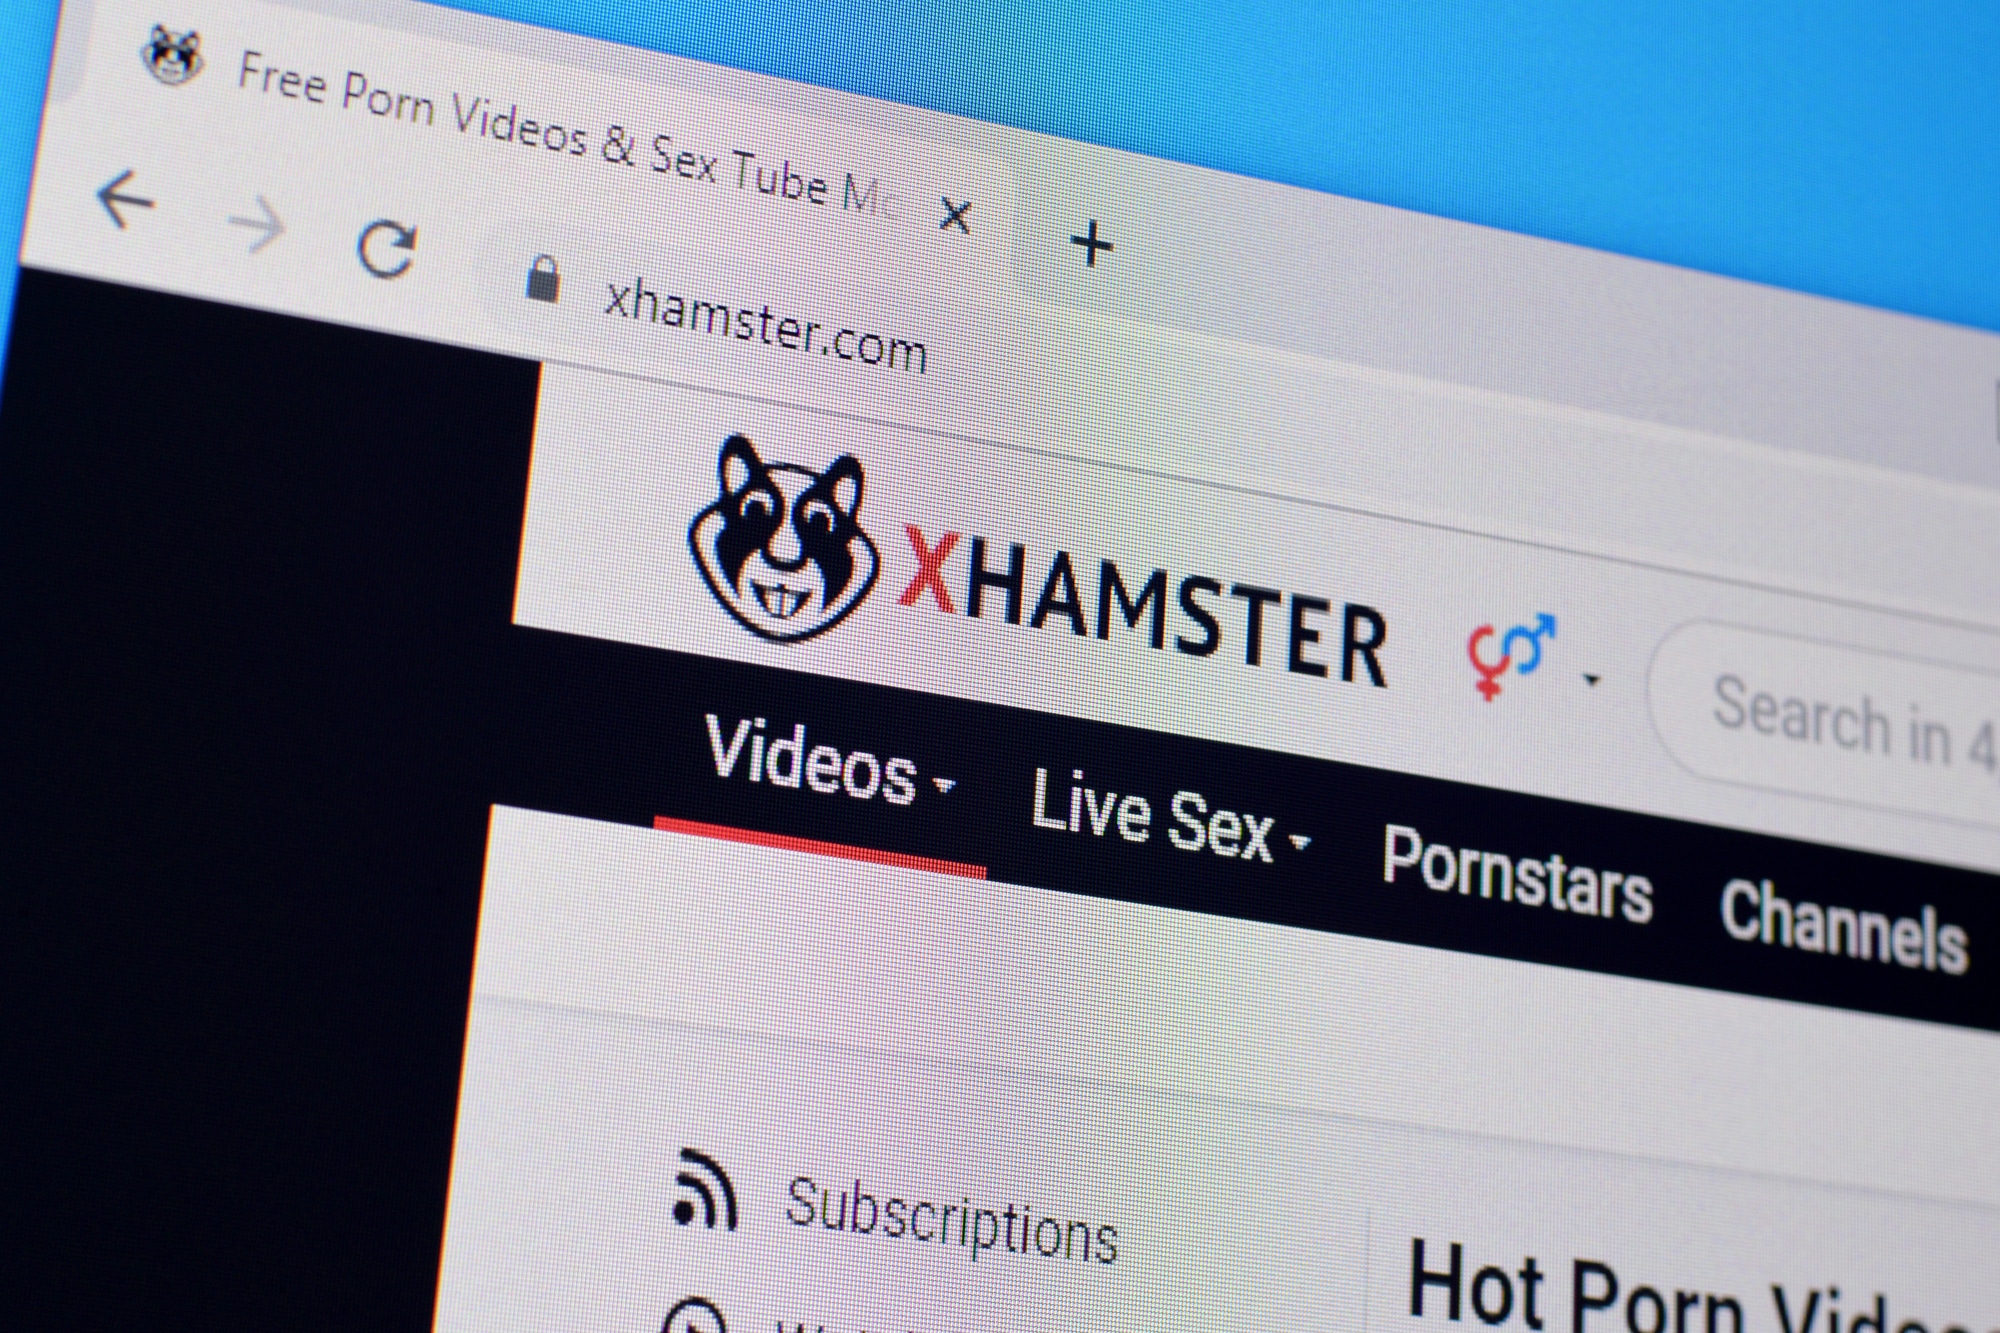 xHamster: Blocking in Germany is now fixed